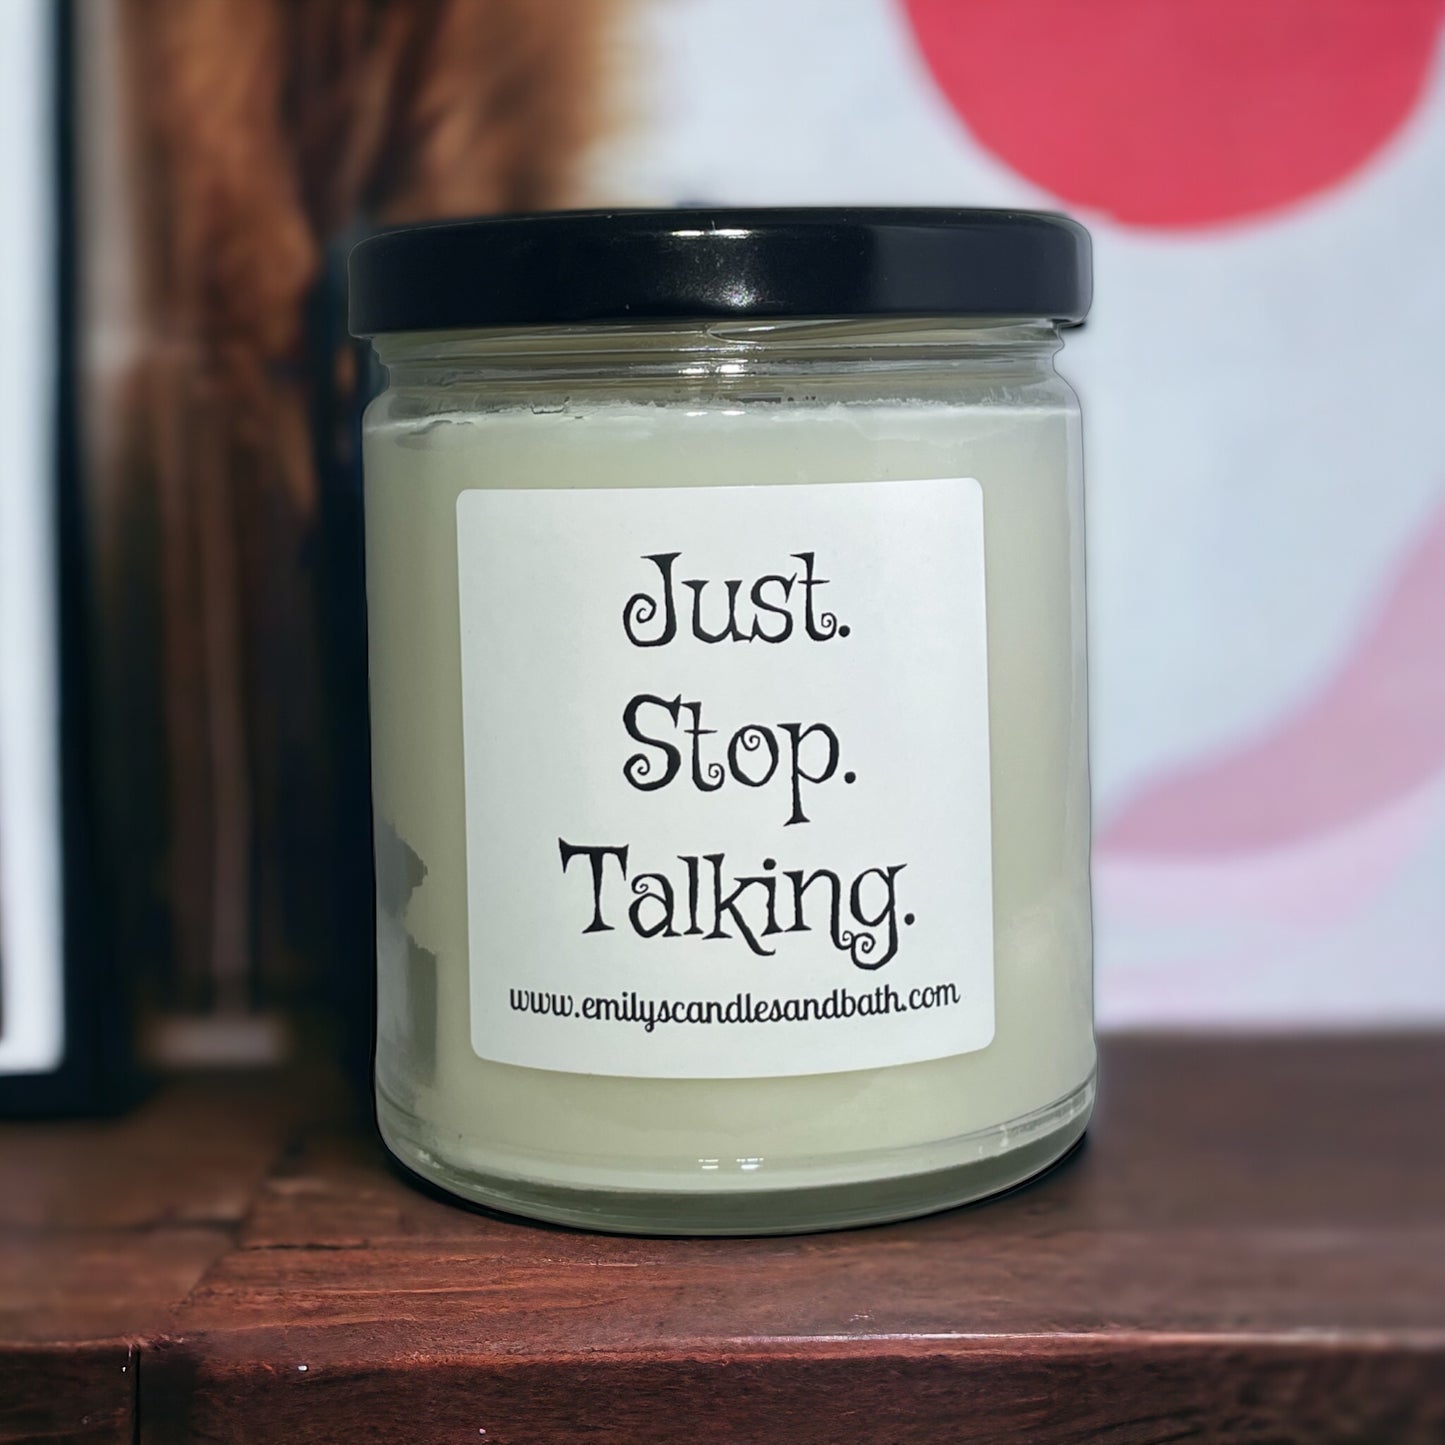 9 Oz Soy Candle "Just. Stop. Talking” Sun Ripened Raspberry Scent